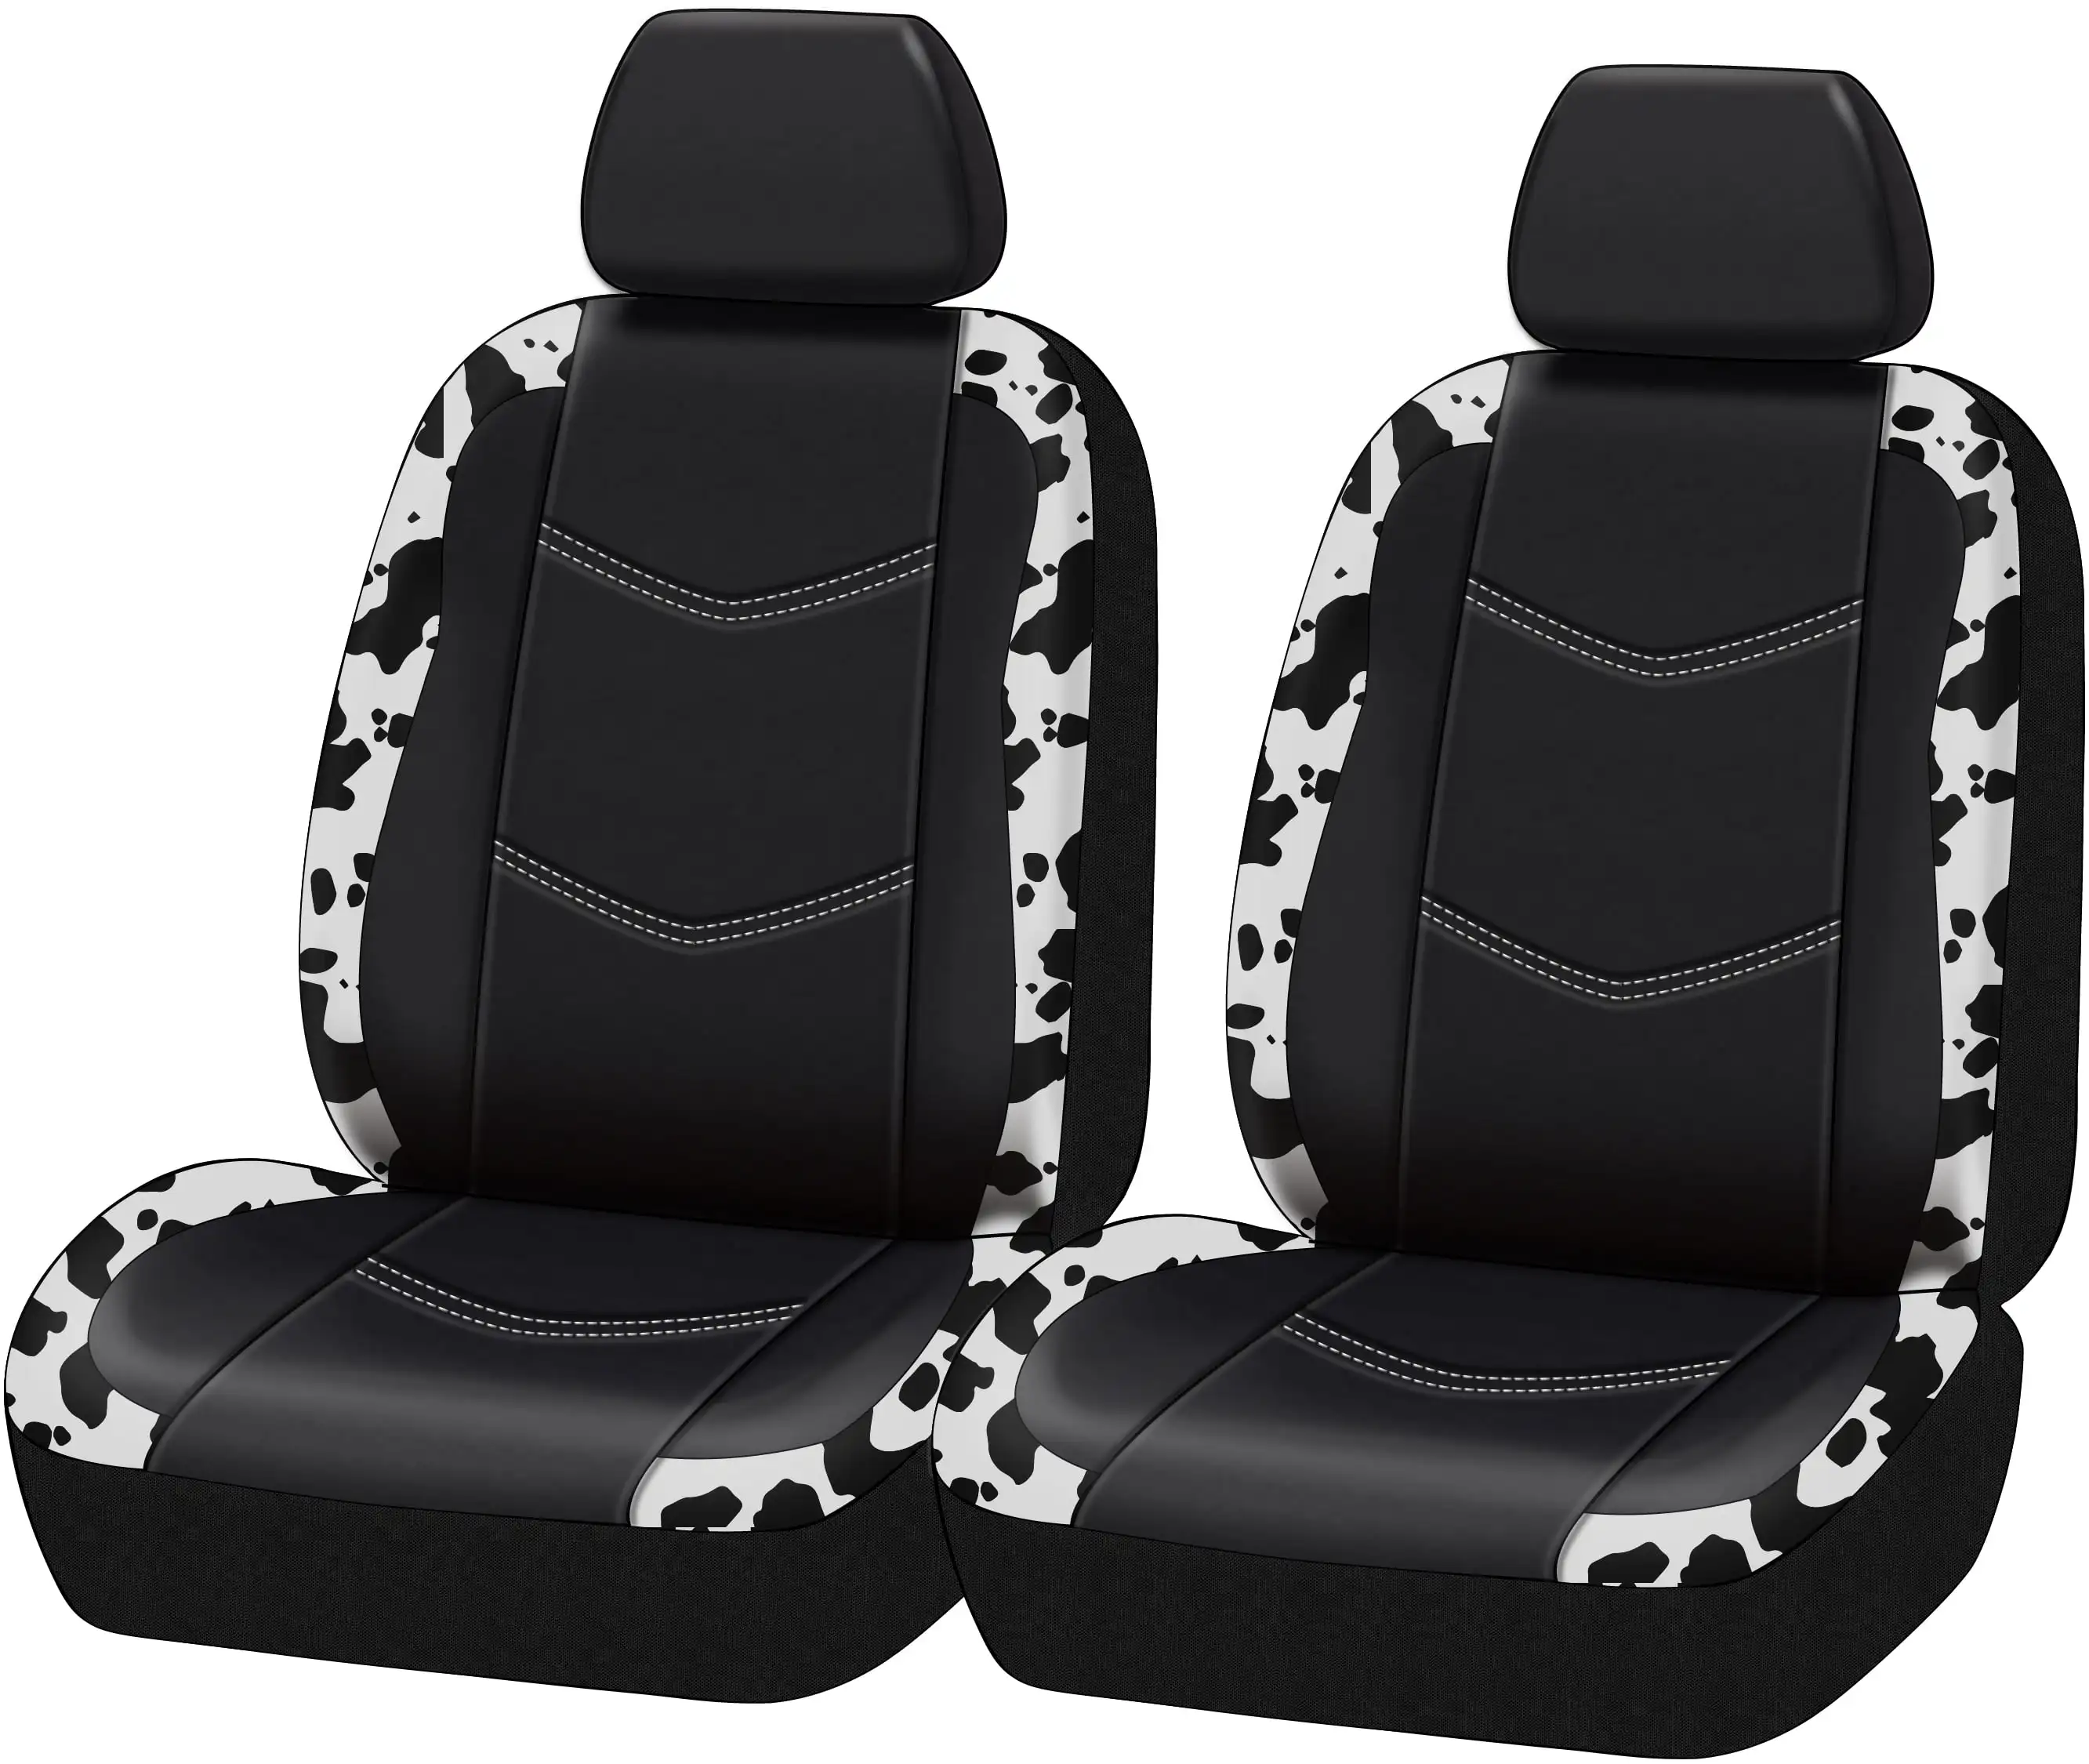 

Black,White Cow Faux Leather Car Seat and Headrest Cover, Set of 2, HP211126